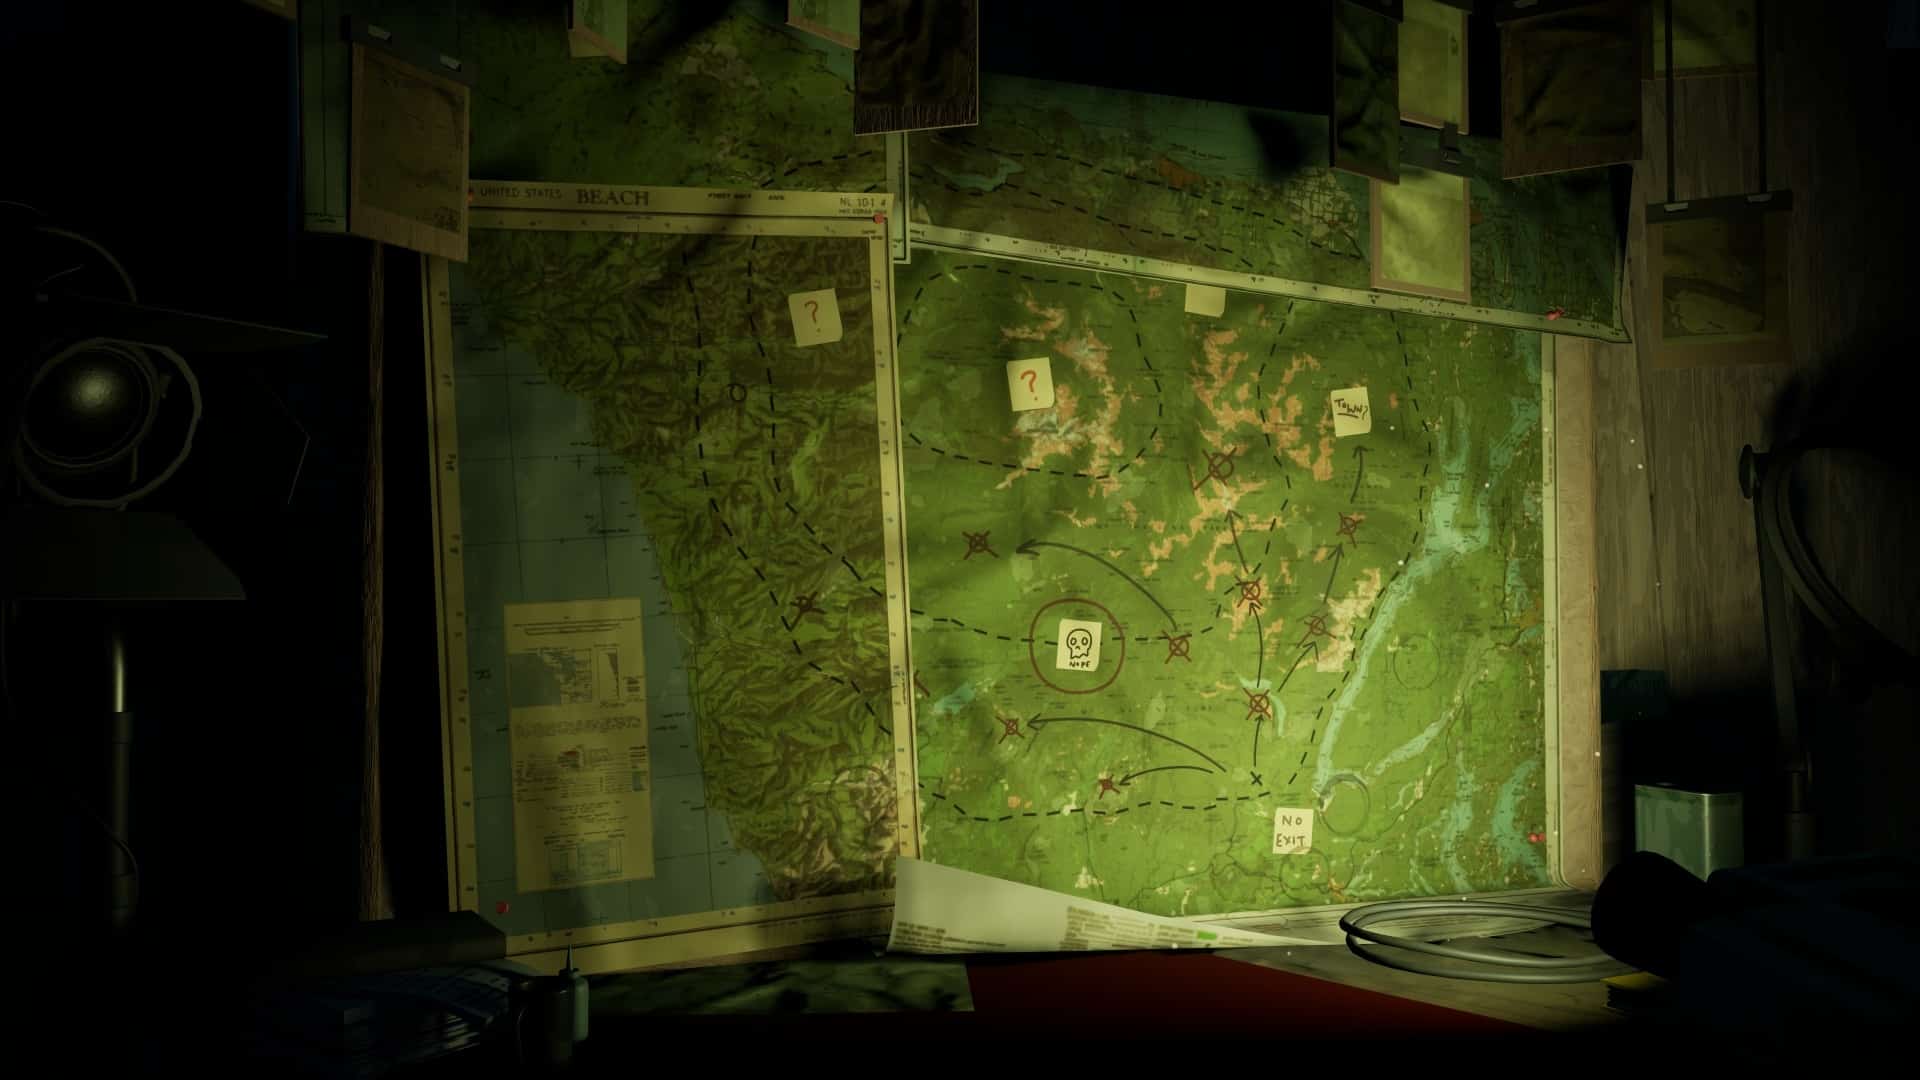 (We explore a mysterious exclusion zone full of dangerous anomalies.)